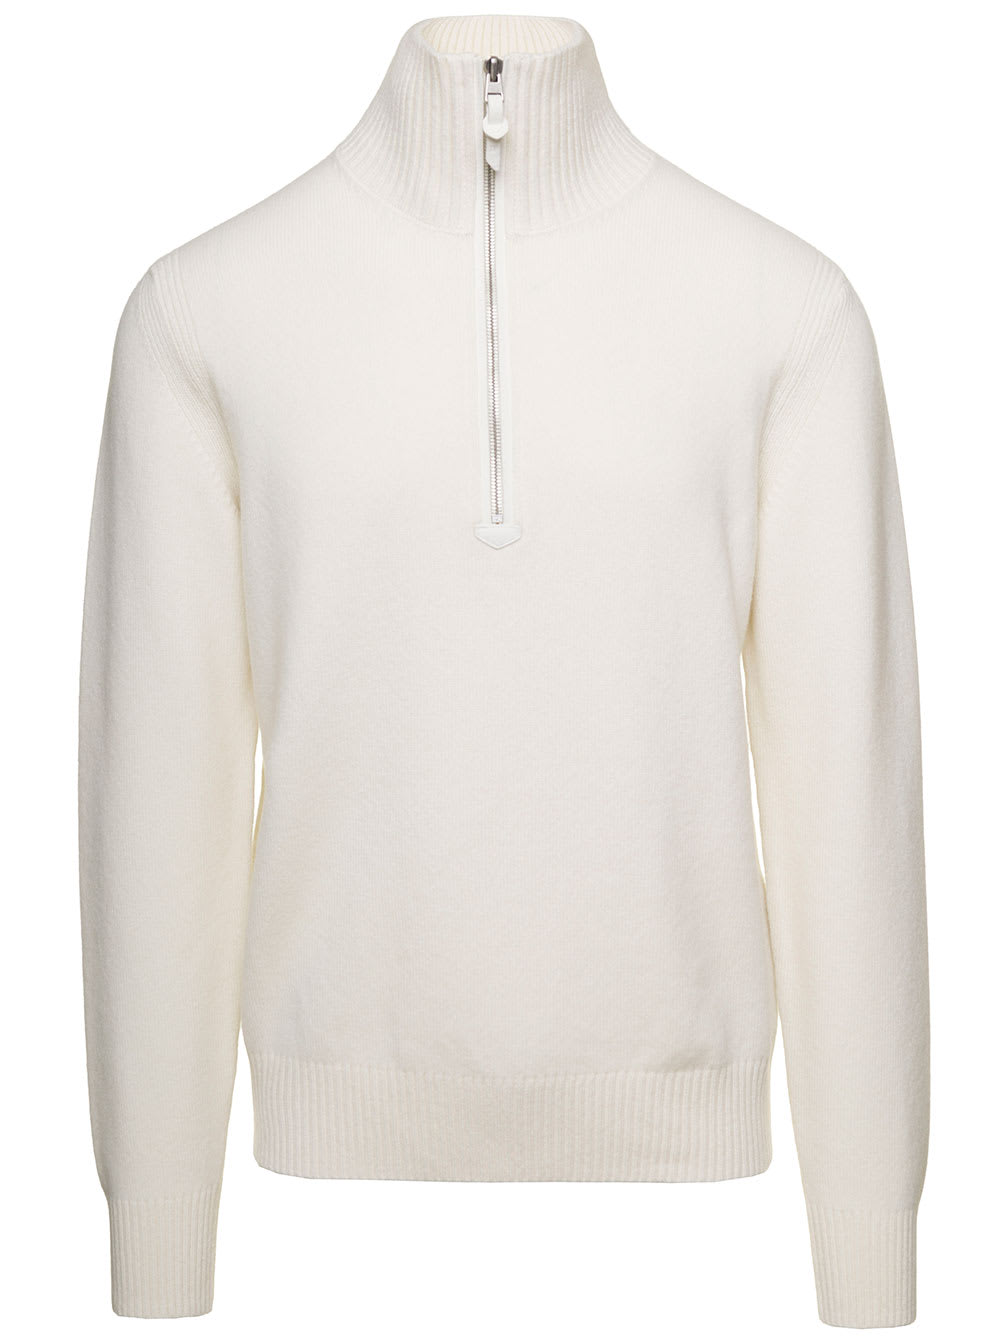 TOM FORD WHITE LONG-SLEEVE SWEATER WITH ZIP-UP MOCK NECK IN WOOL AND CASHMERE MAN